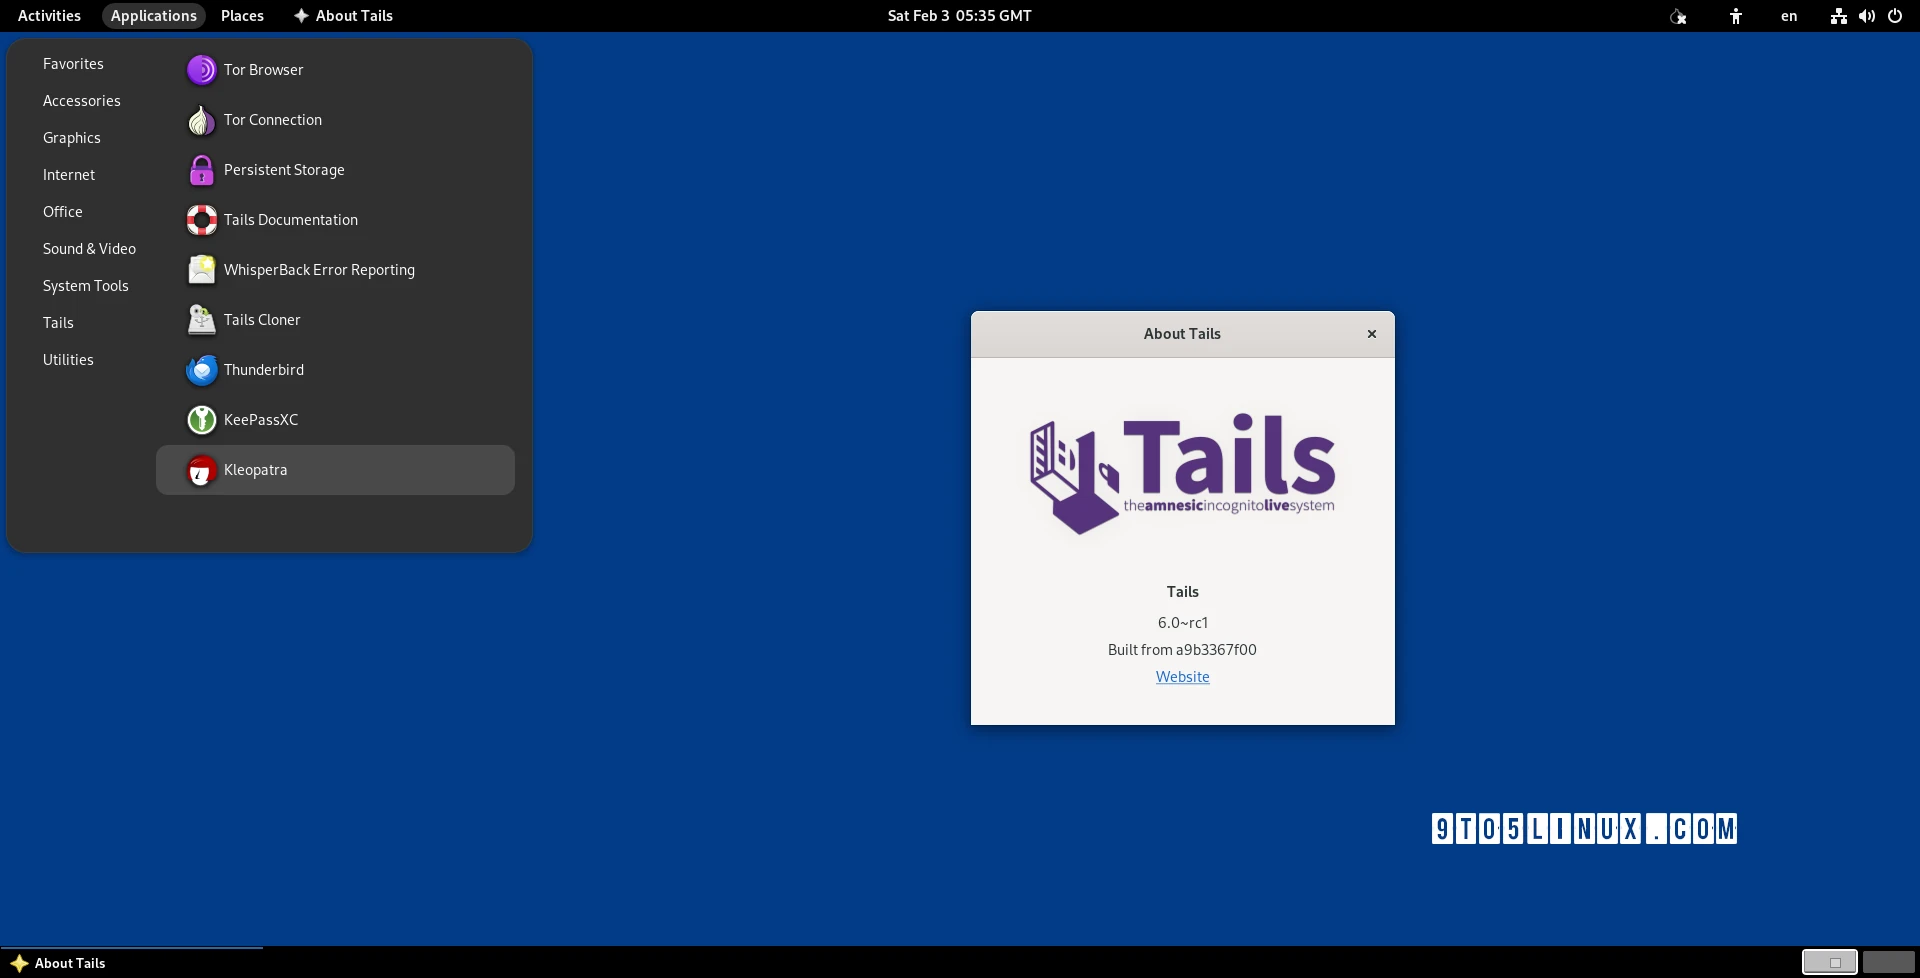 Tails 6.0 Anonymous OS Launches February 27th Based on Debian 12 Bookworm